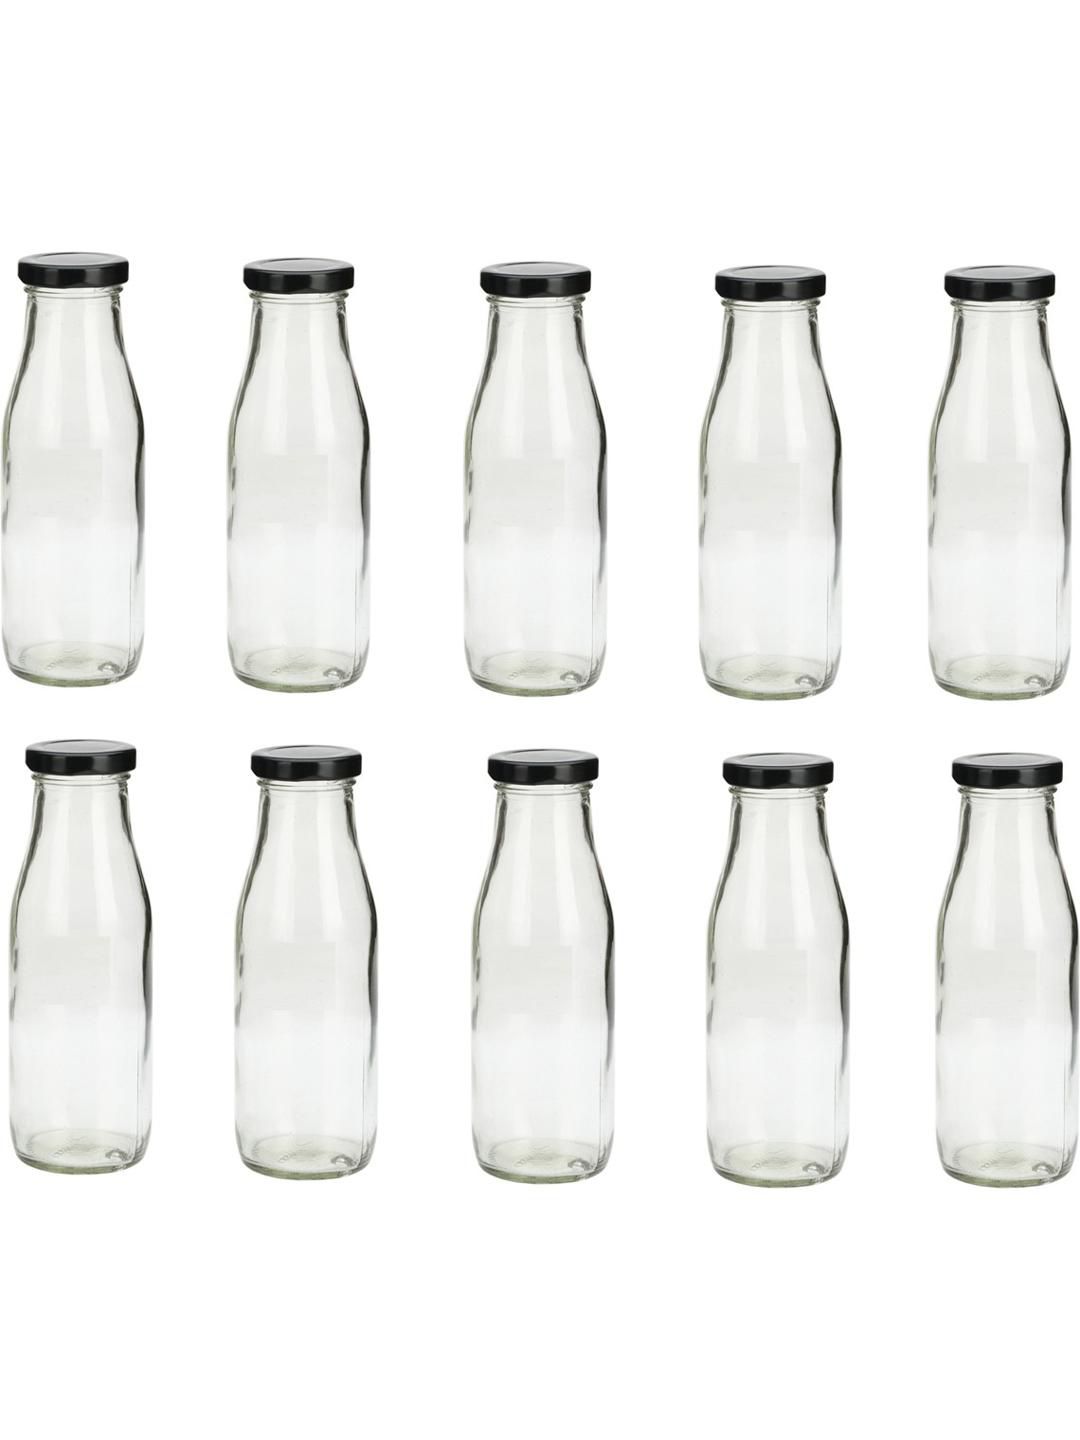     			AFAST Multipurpose Bottle Glass Transparent Utility Container ( Set of 10 )